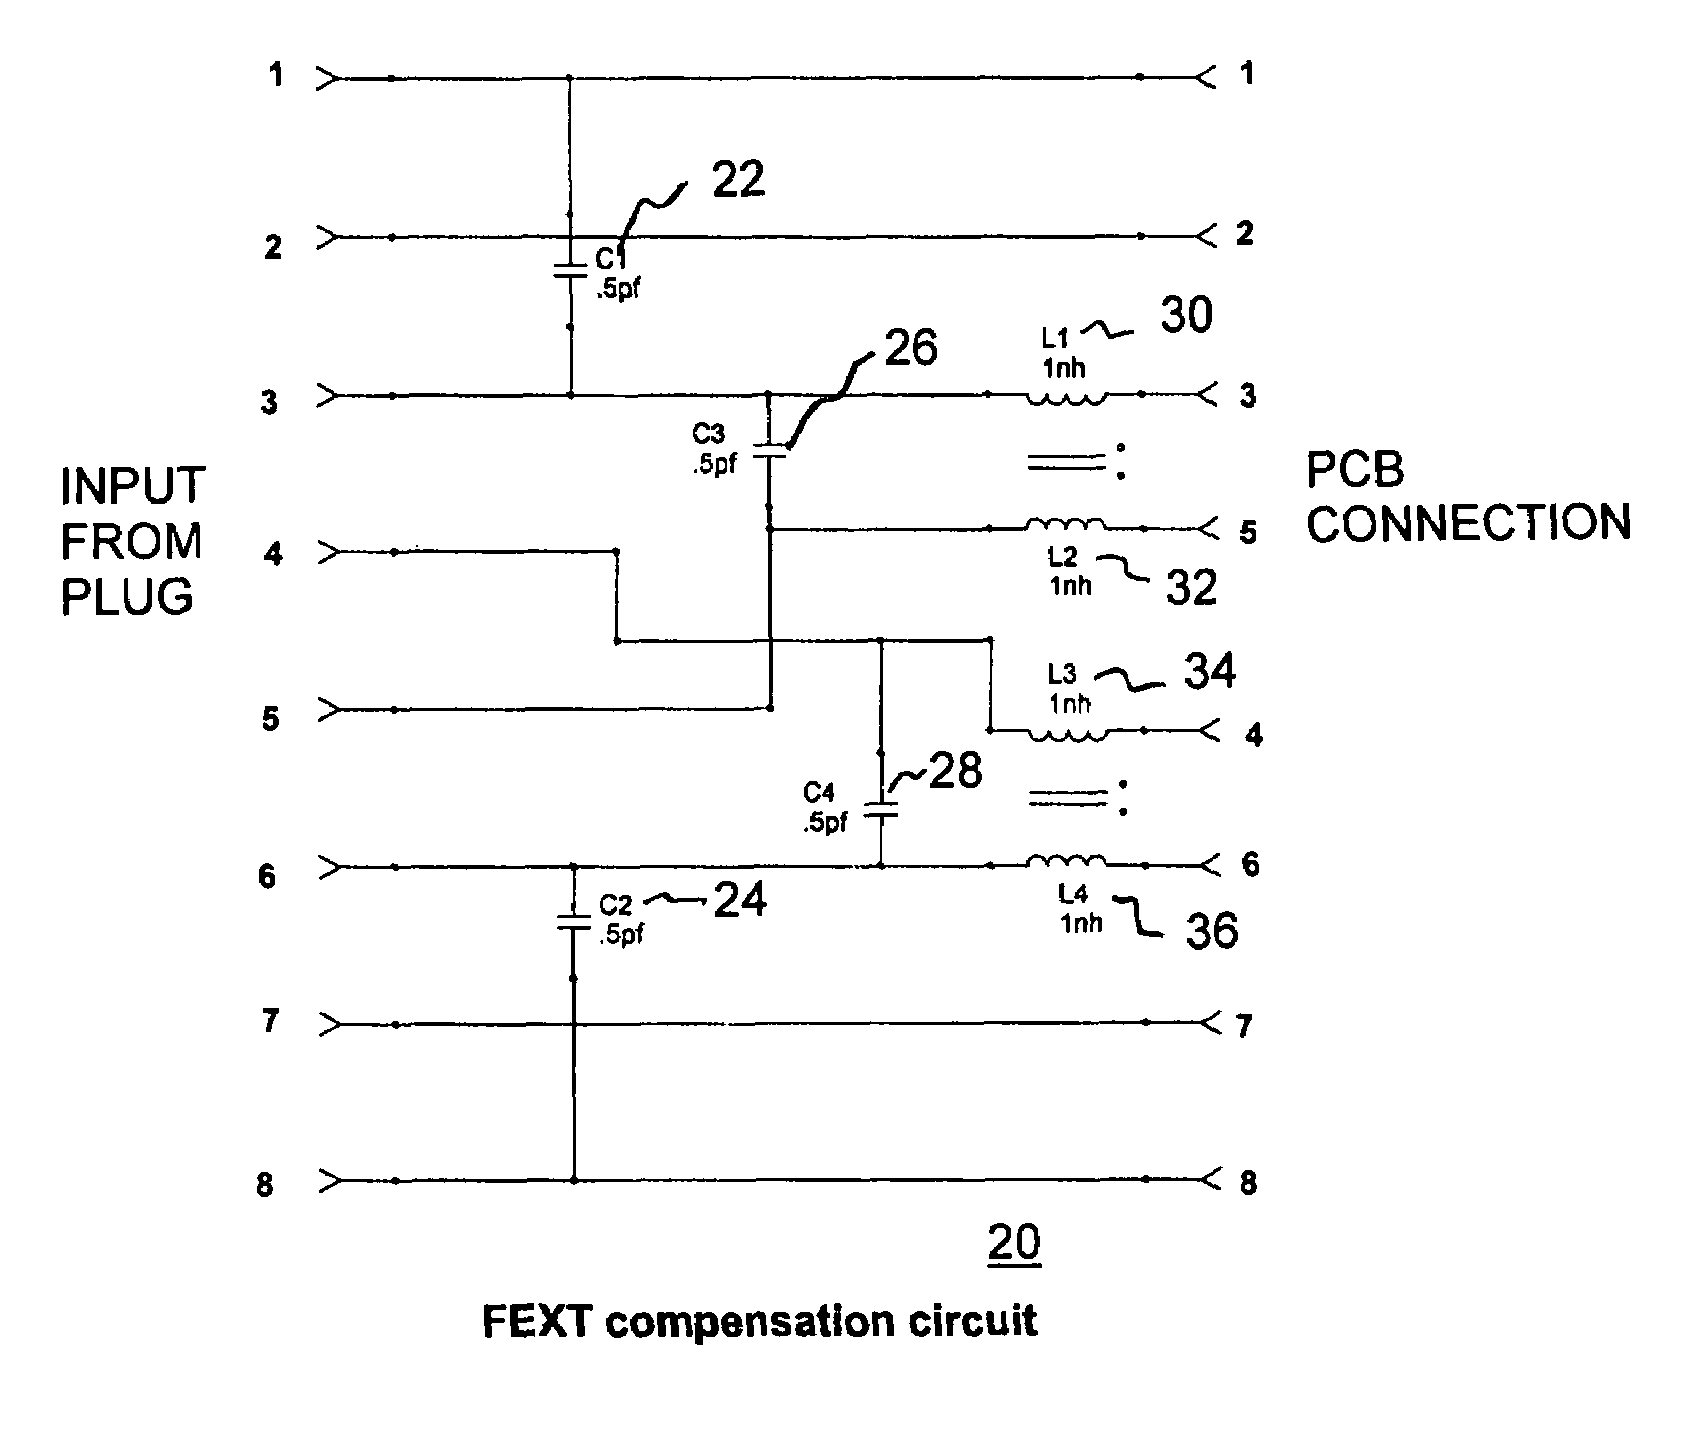 FEXT cancellation of mated RJ45 interconnect